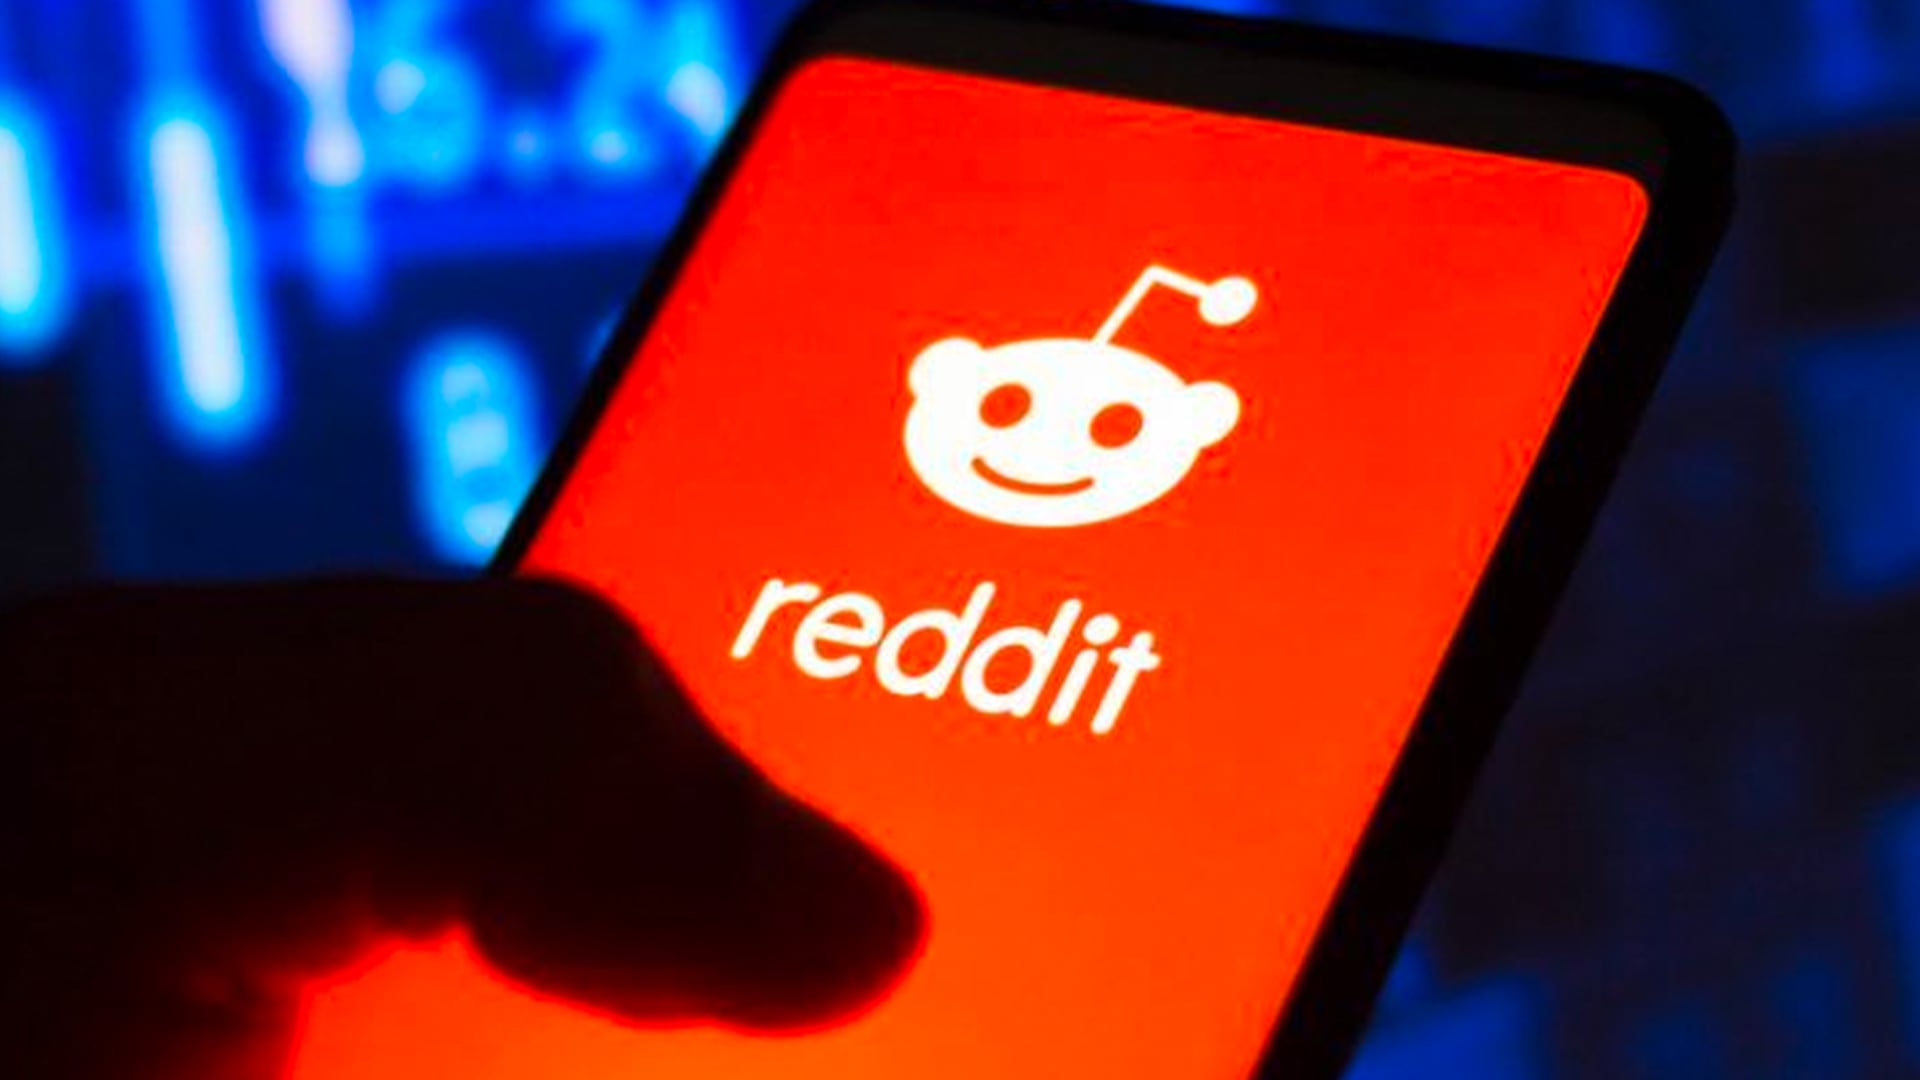 Reddit plans to have its IPO soon, likely by March, seeks a valuation